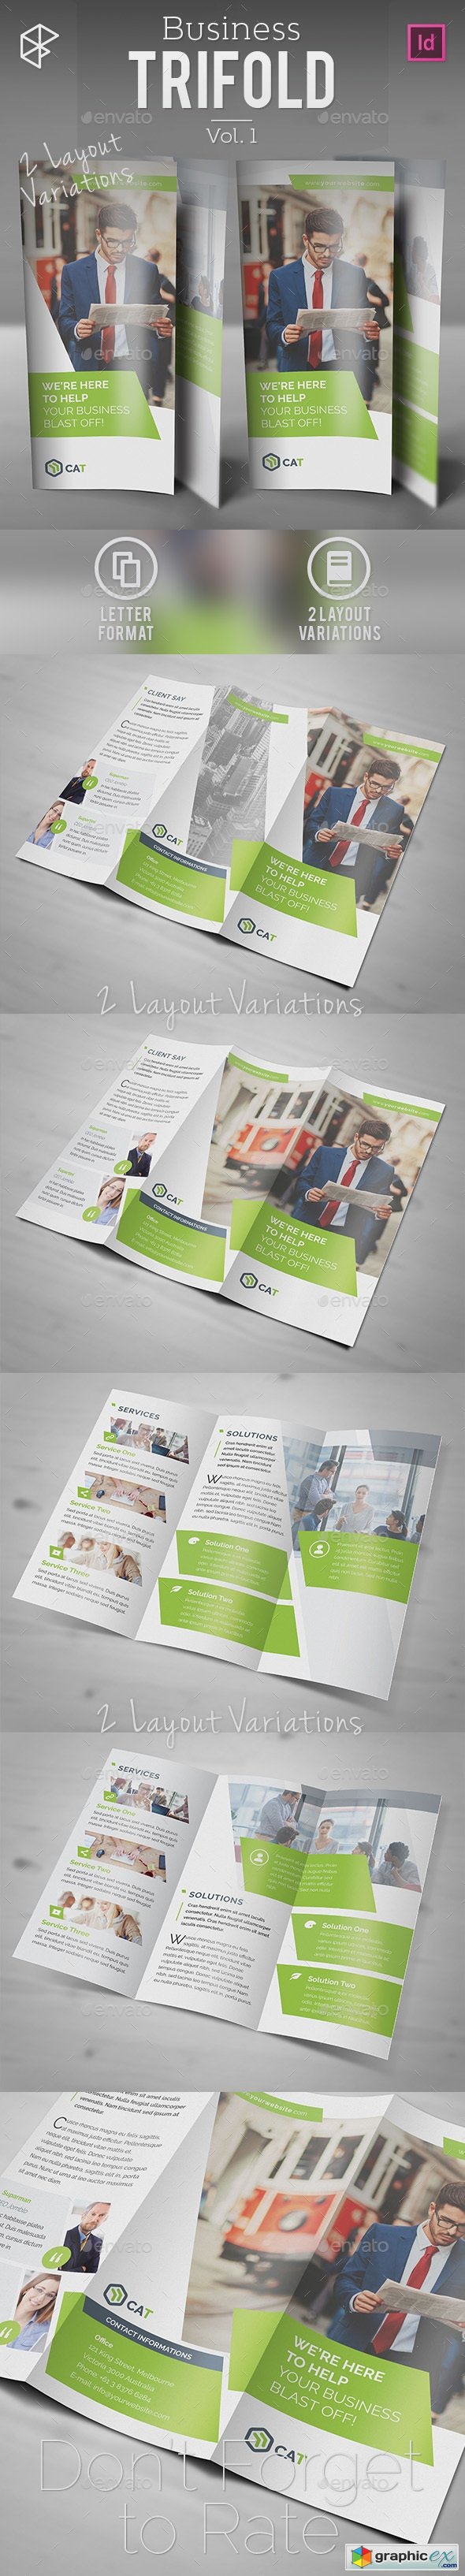 Business Trifold Vol 1